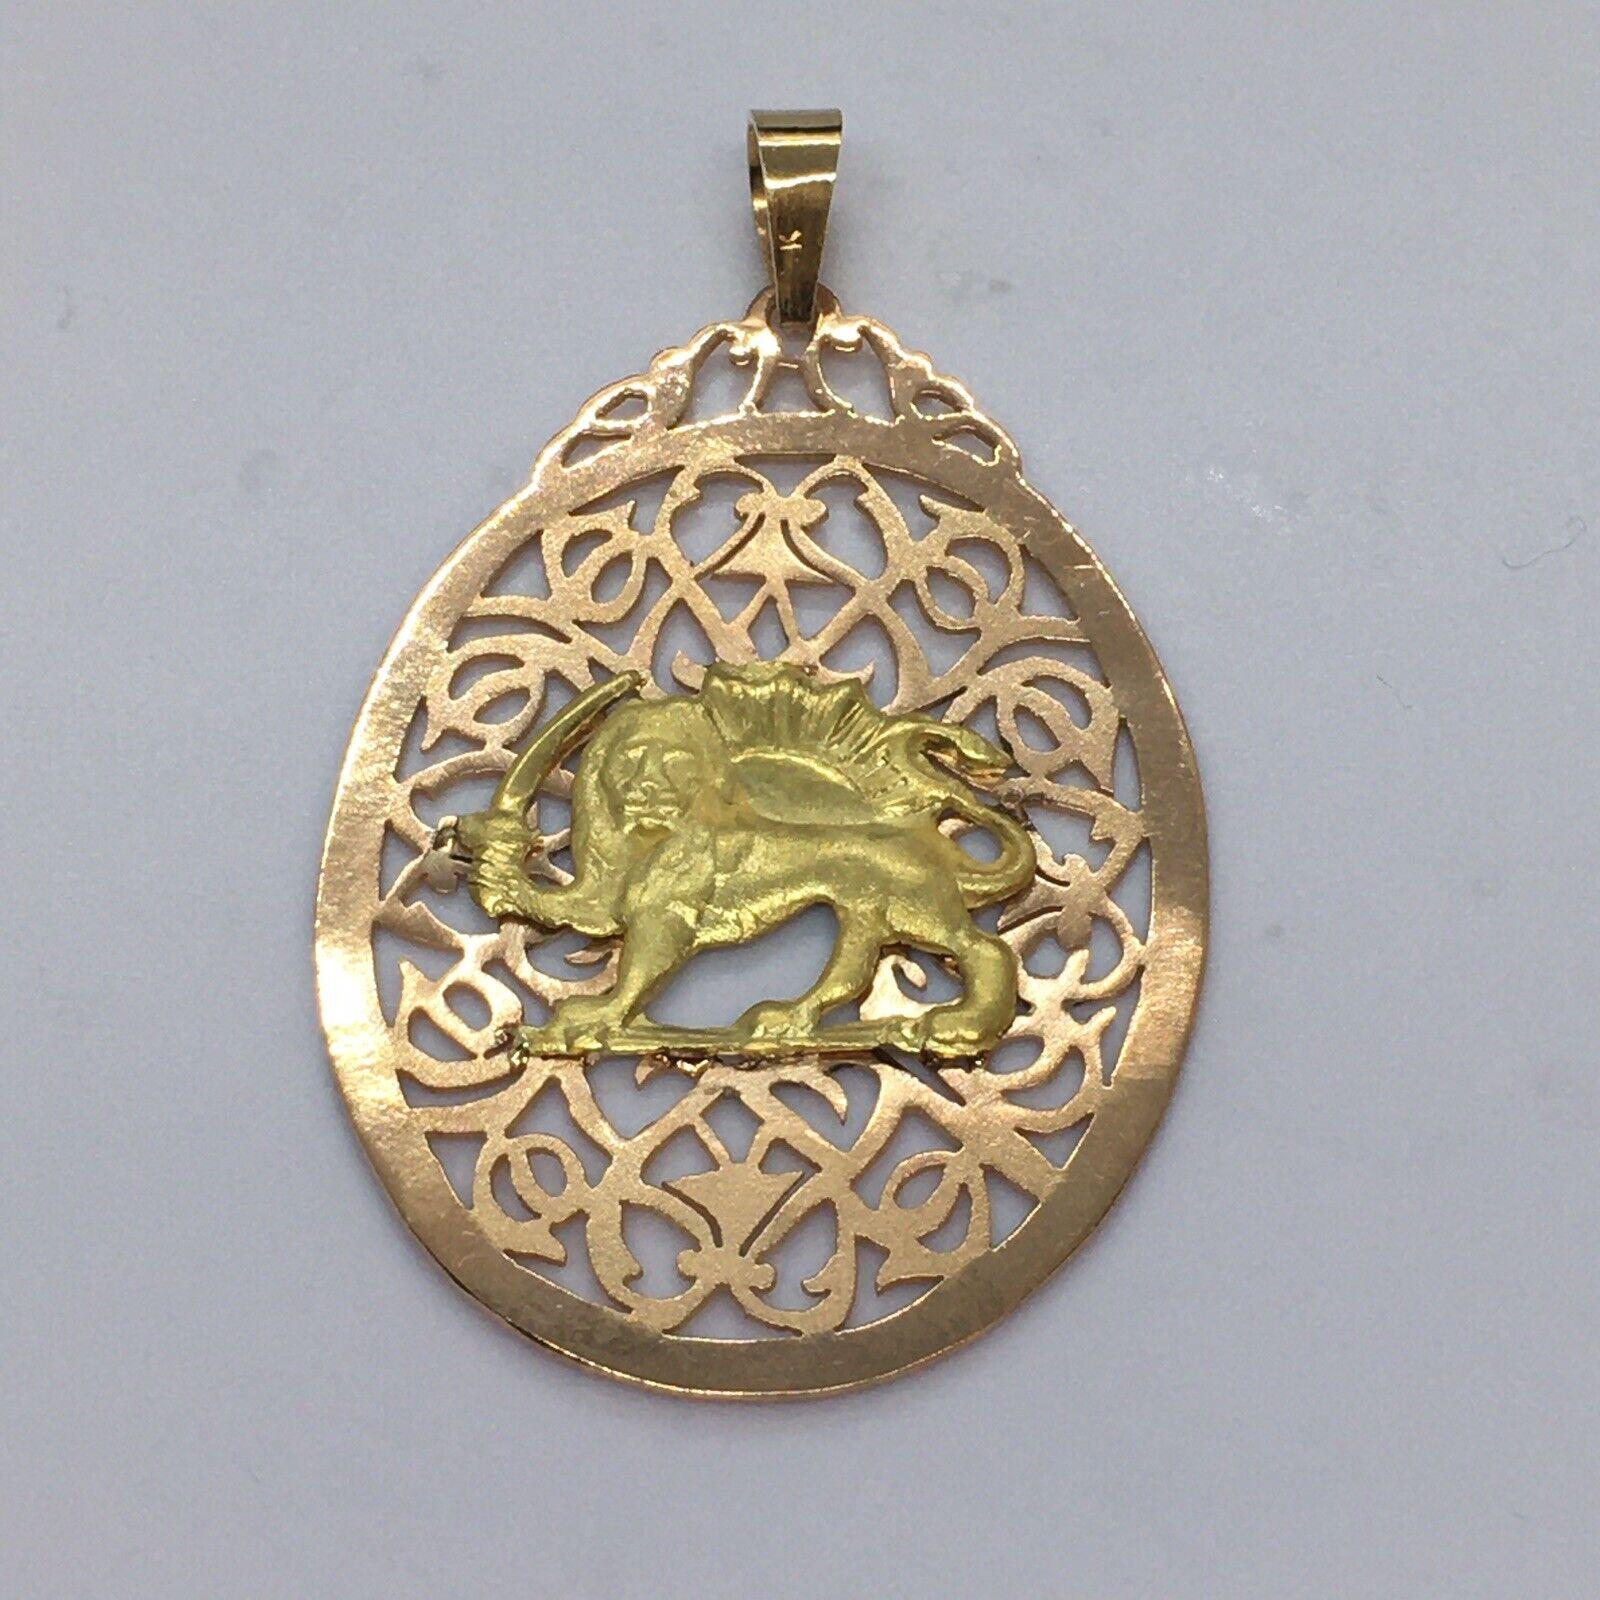 
14k Yellow Gold Butterfly Filigree Charm 

Weight: 10.9 gram, 14K Rose gold with high karat gold Lion
Measurement: 2.5 inch long, 1.5 inch wide
Condition: new condition, no repairs, no damage, see pictures  
Made in USA 